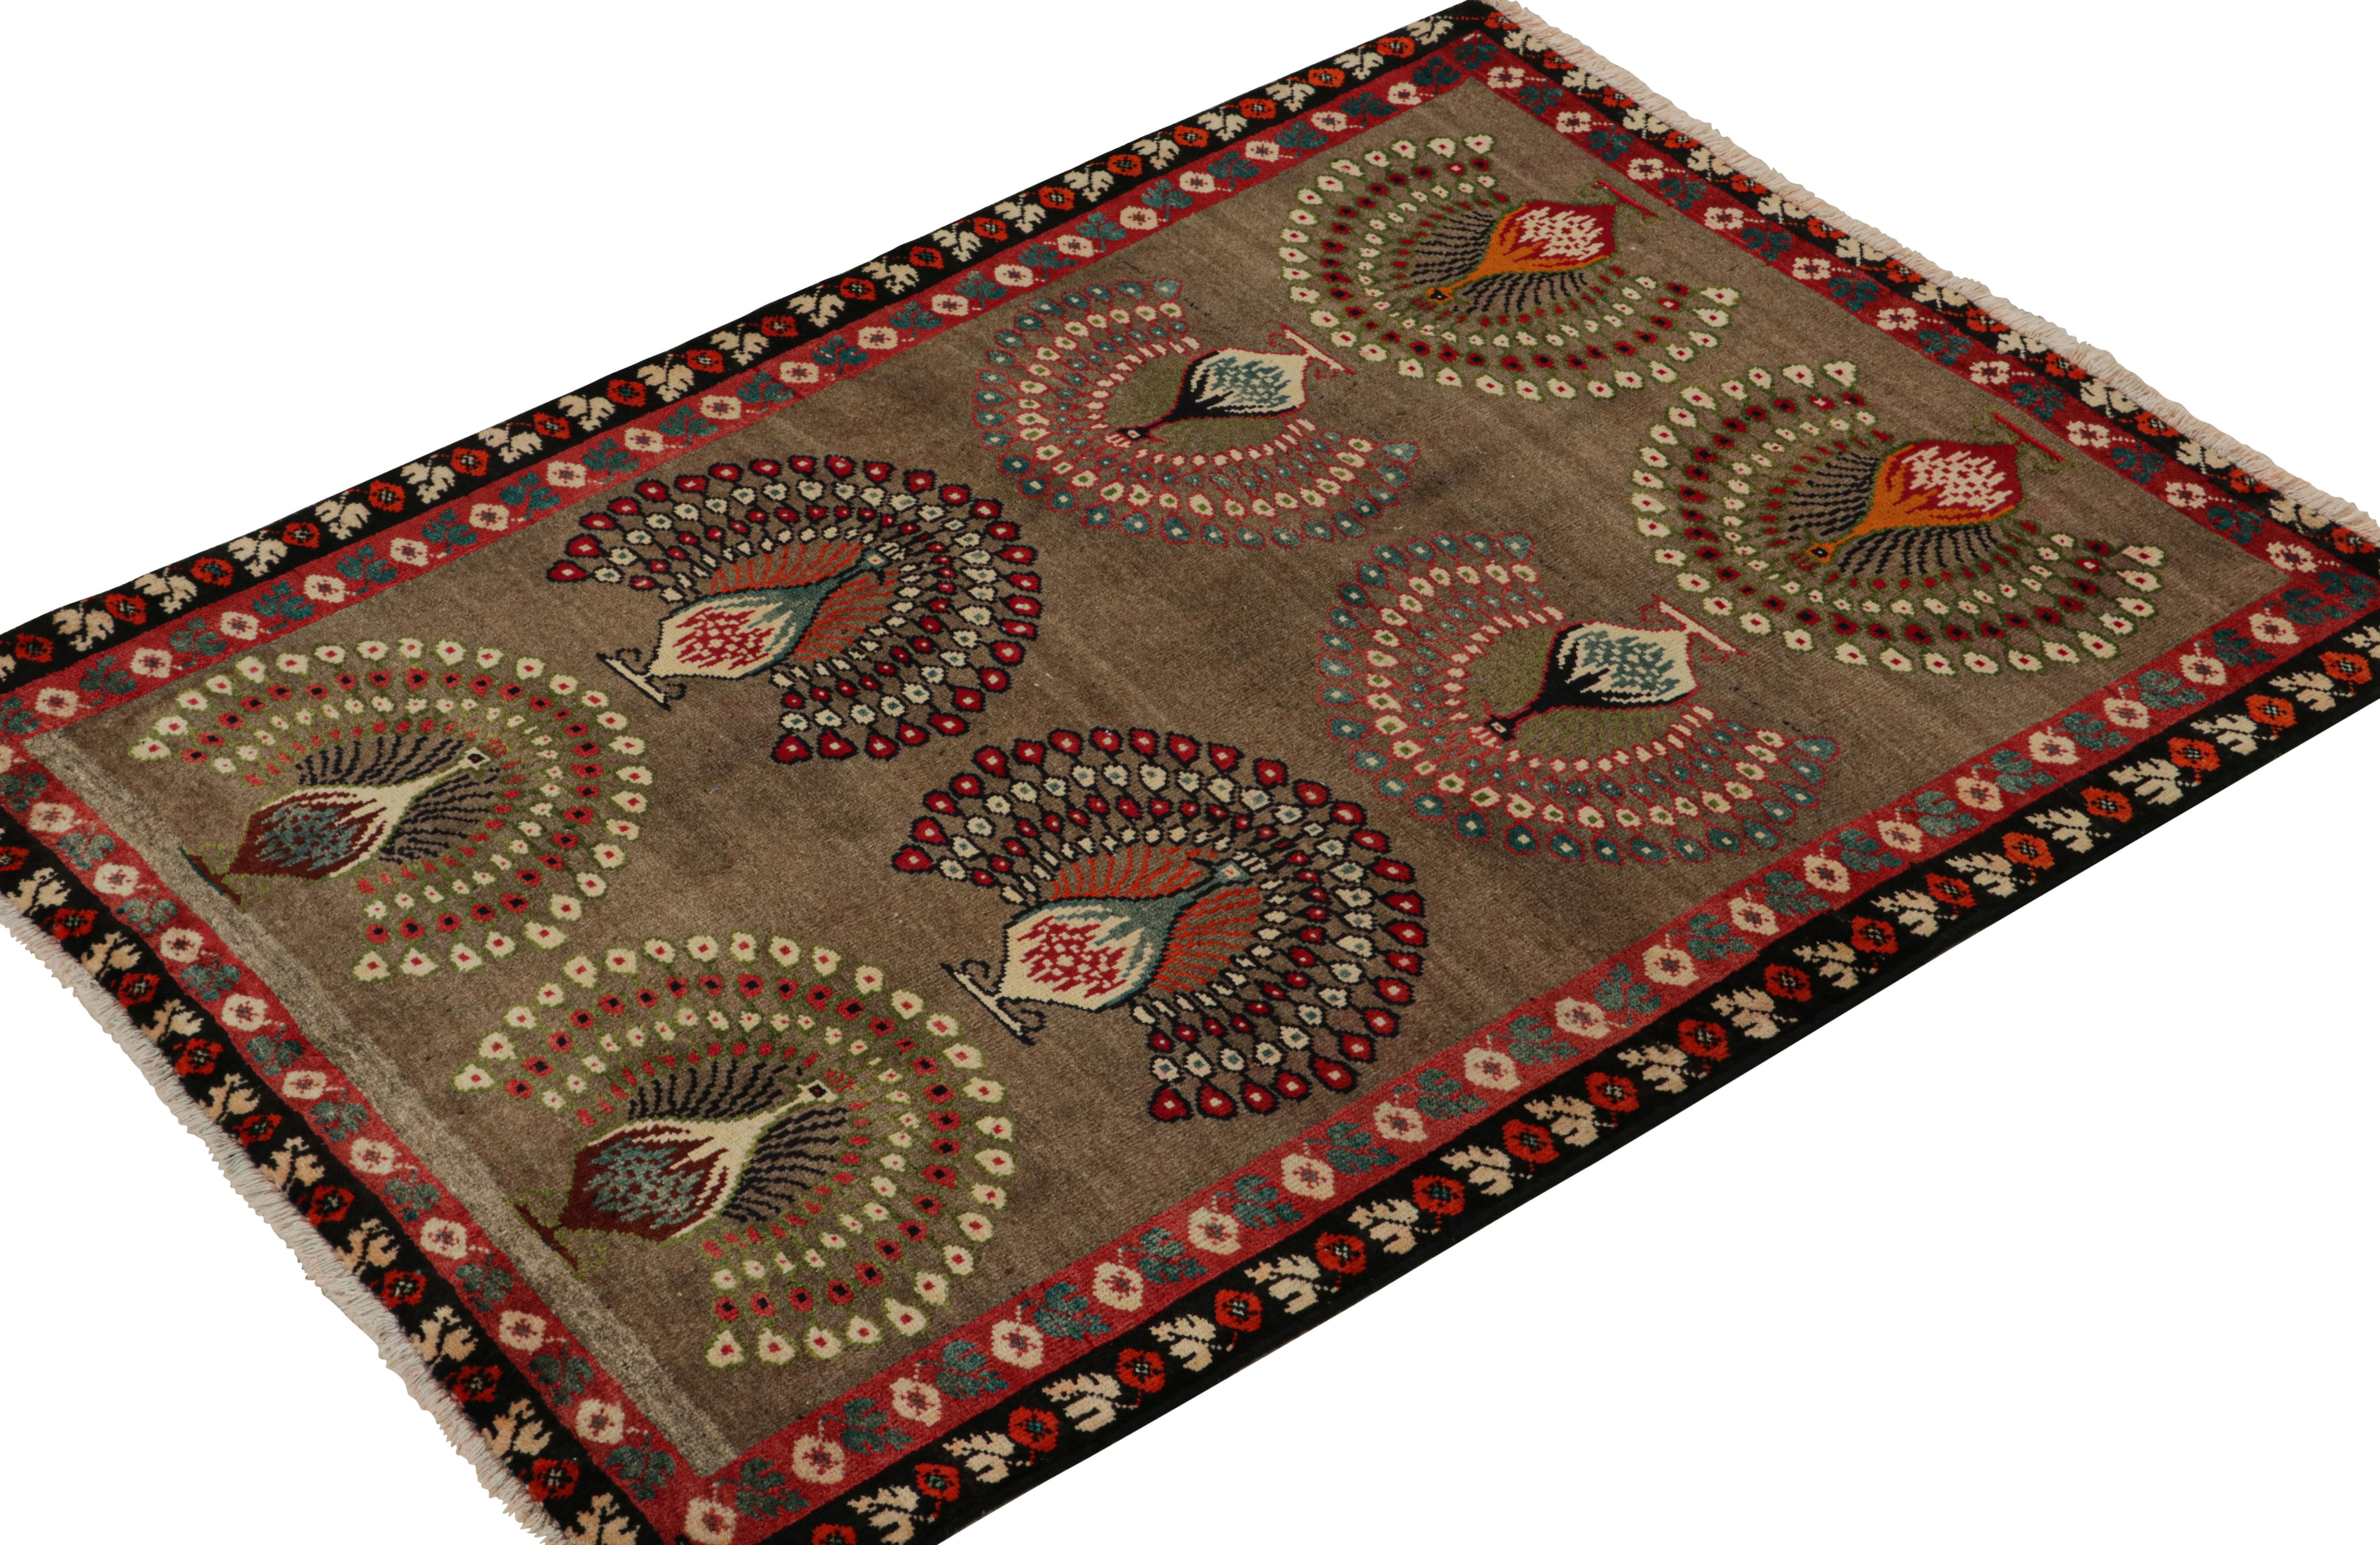 This vintage 4x5 Gabbeh Persian rug is from the latest entries in Rug & Kilim’s rare tribal curations. Hand-knotted in wool circa 1950-1960.

On the Design:

This tribal provenance is one of the most primitive, and collectible shabby-chic styles